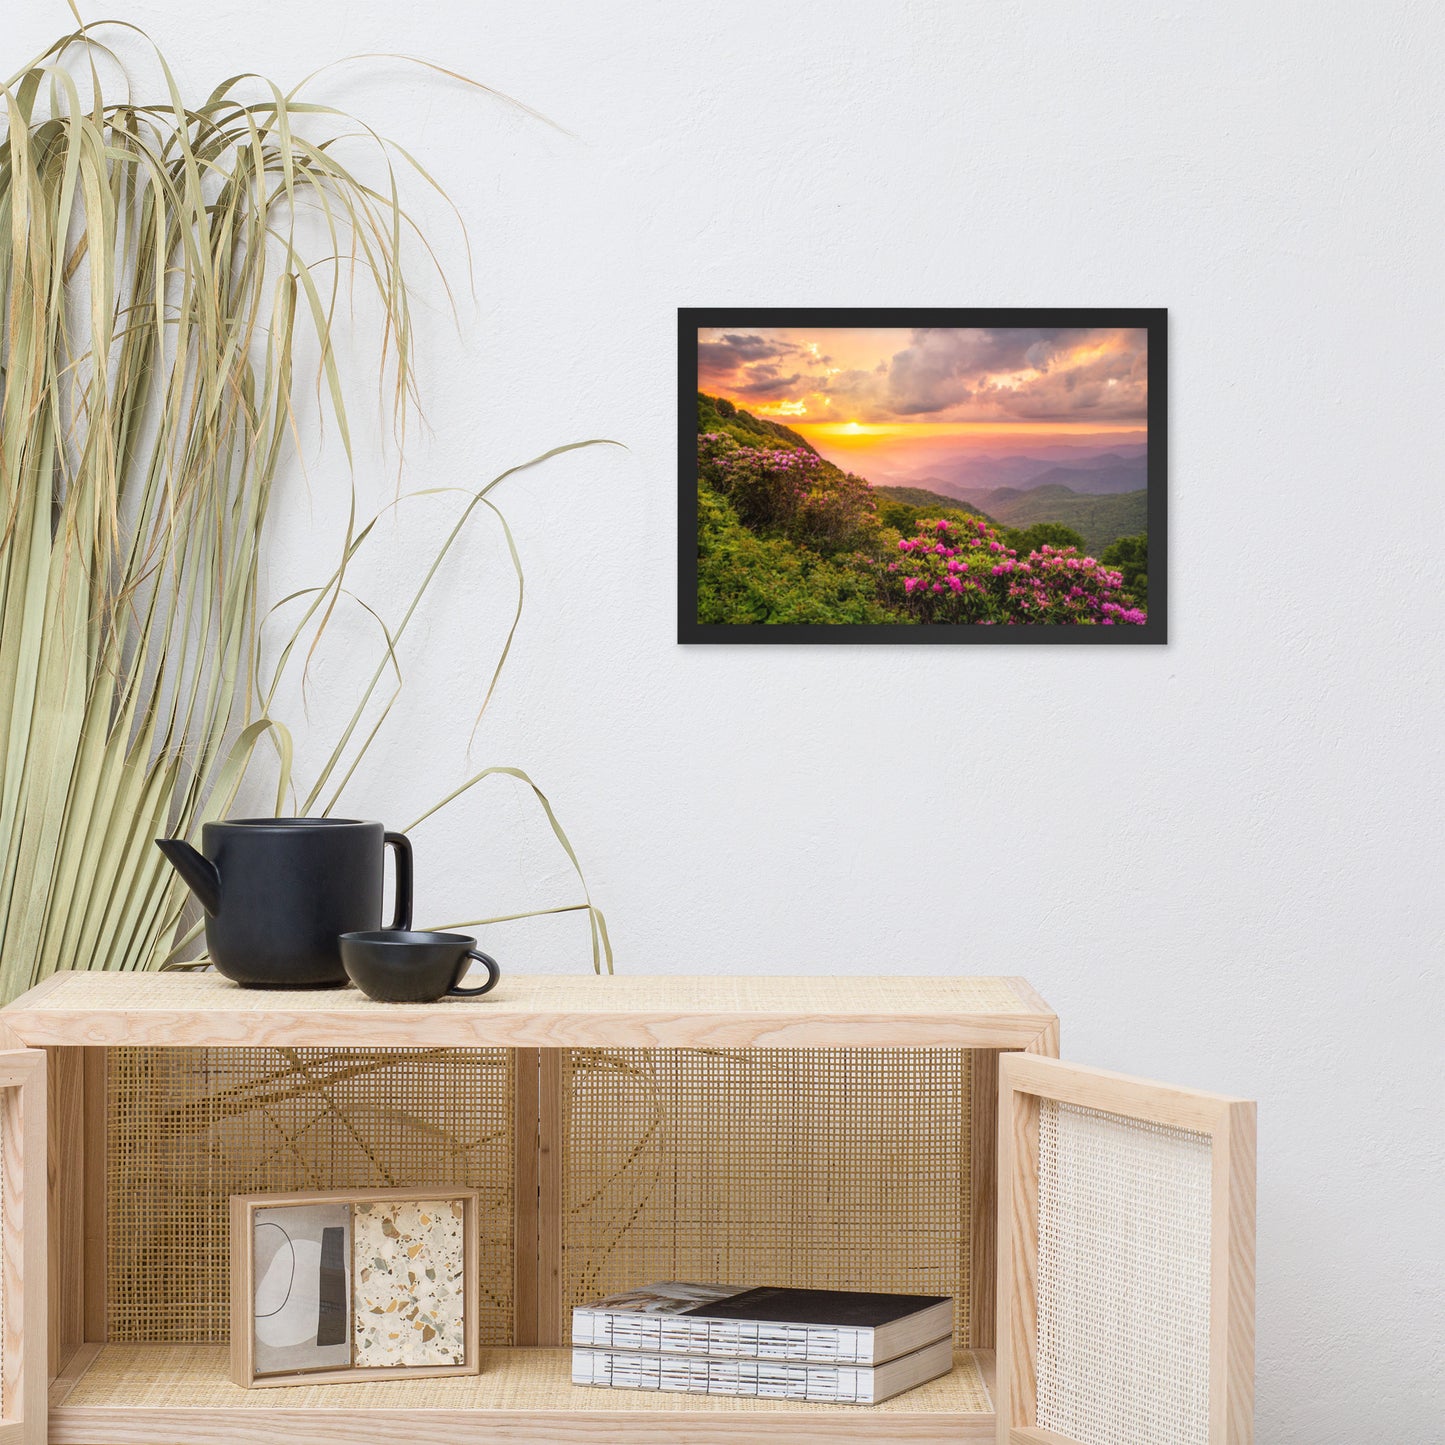 Close of the Day Landscape Photograph Framed Wall Art Print